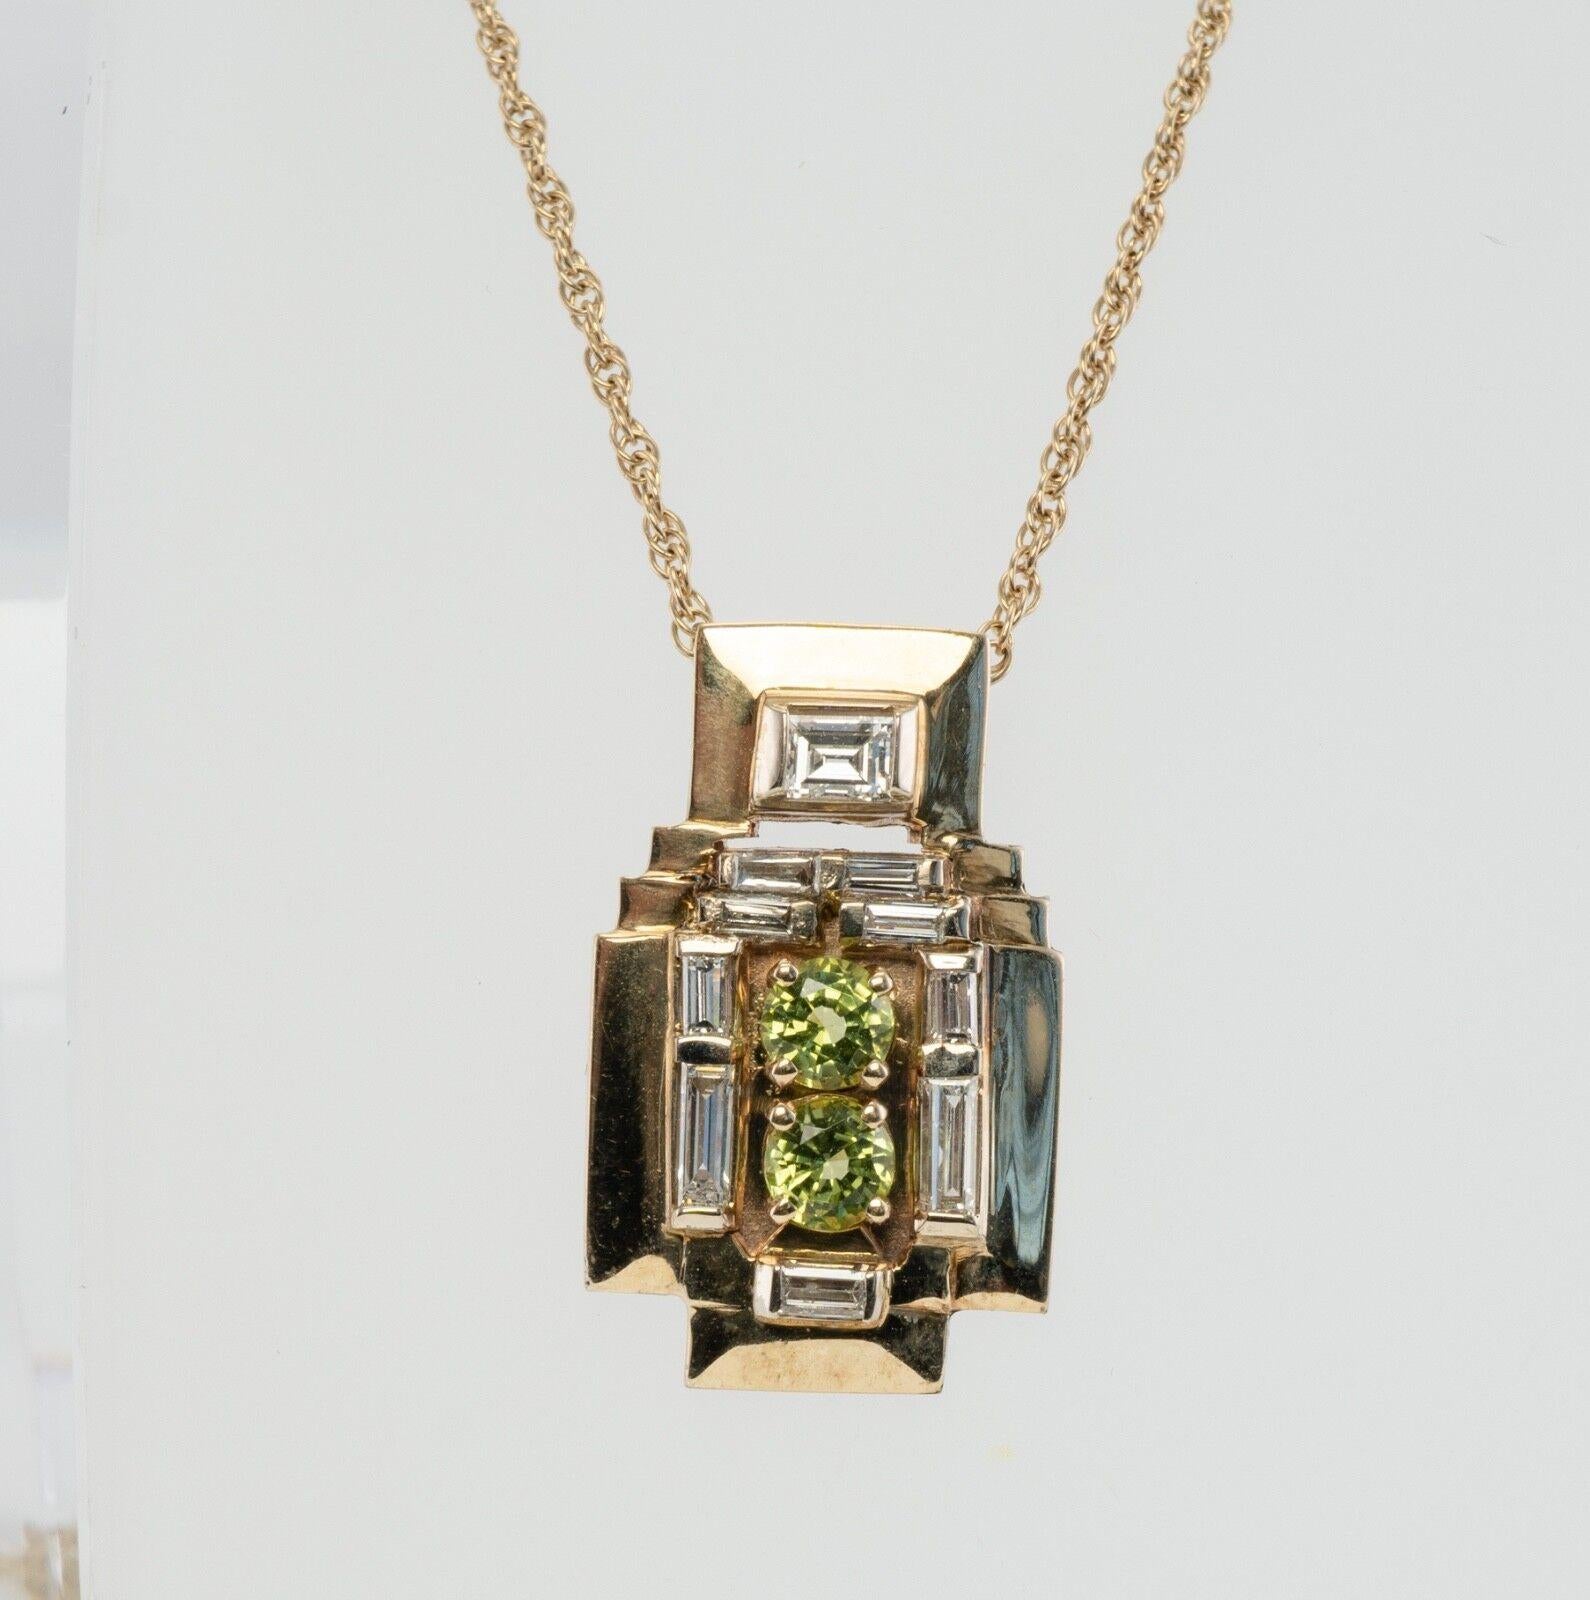 Peridot Diamond Pendant Necklace 14K Gold Vintage

This beautiful estate necklace is finely crafted in solid 14K Yellow gold and set with genuine Peridots and diamond baguettes. Two 3mm each peridot are very clean and transparent gems of great